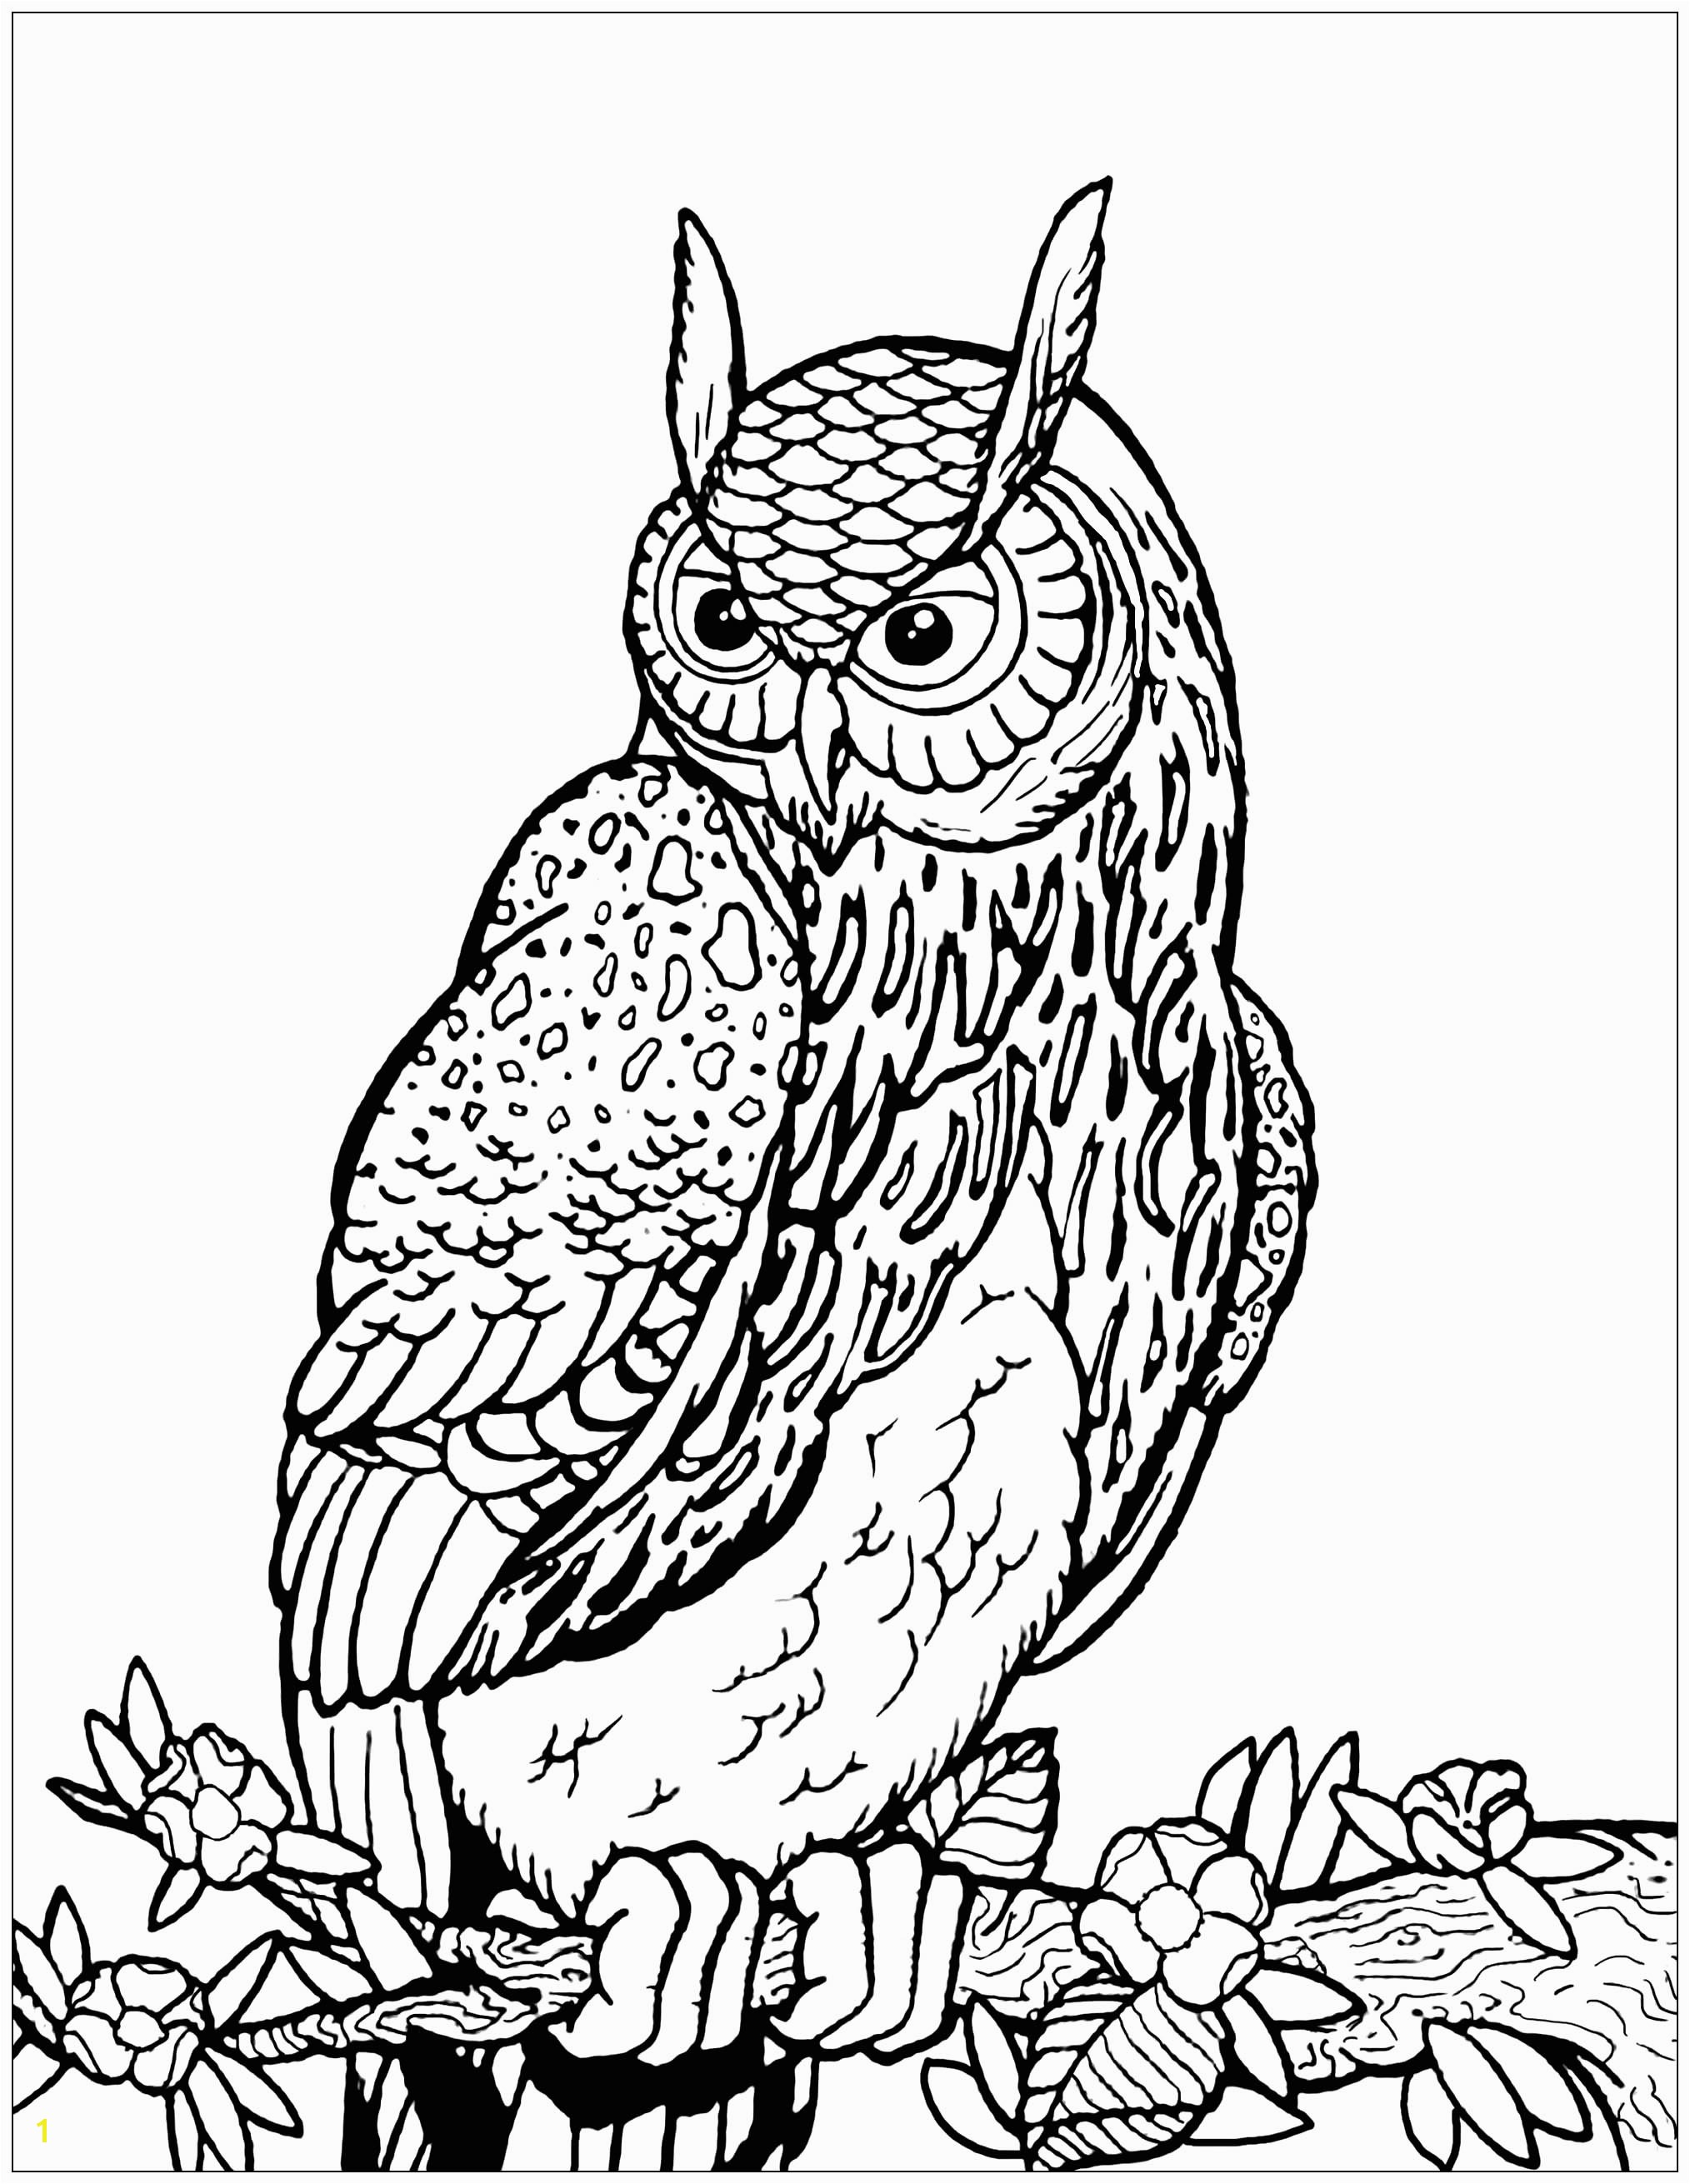 Owl In A Tree Coloring Page Owl On Tree Branch Owls Adult Coloring Pages